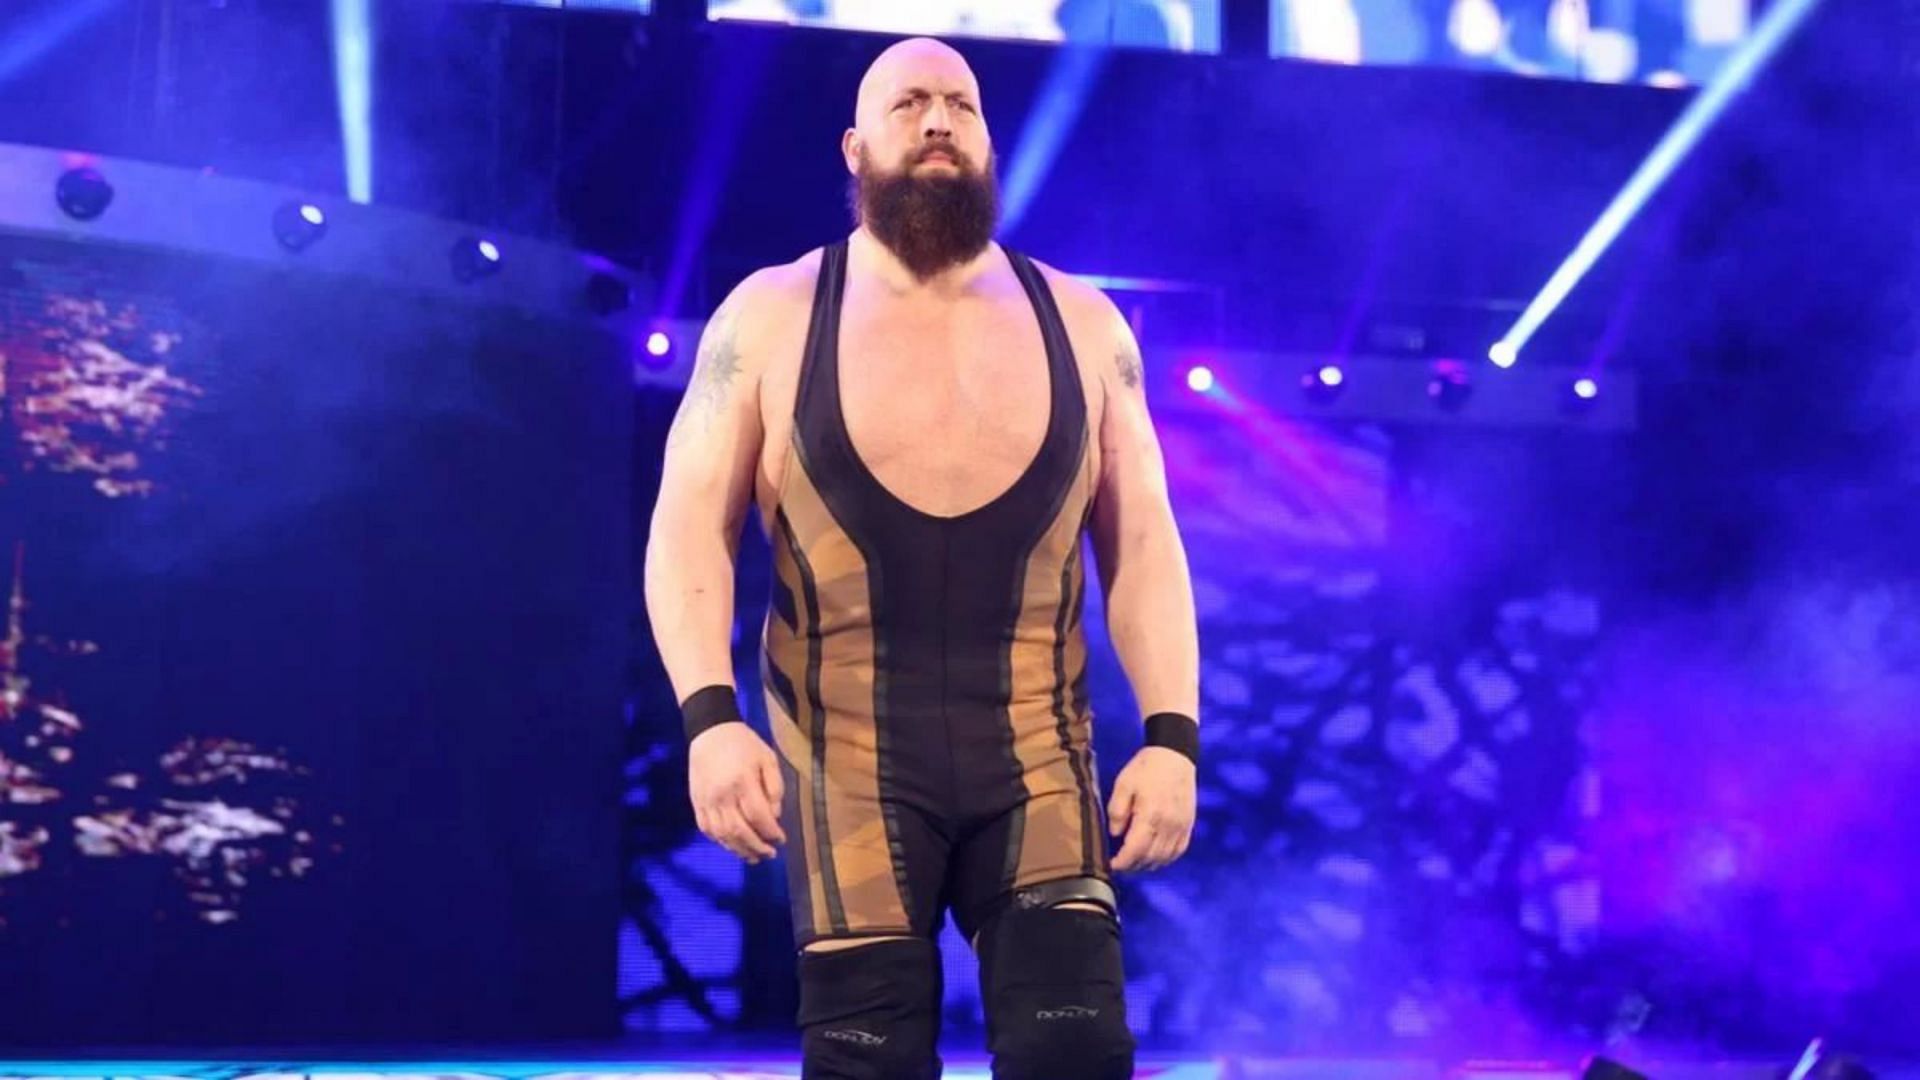 Paul Wight (FKA The Big Show) suffered from acromegaly